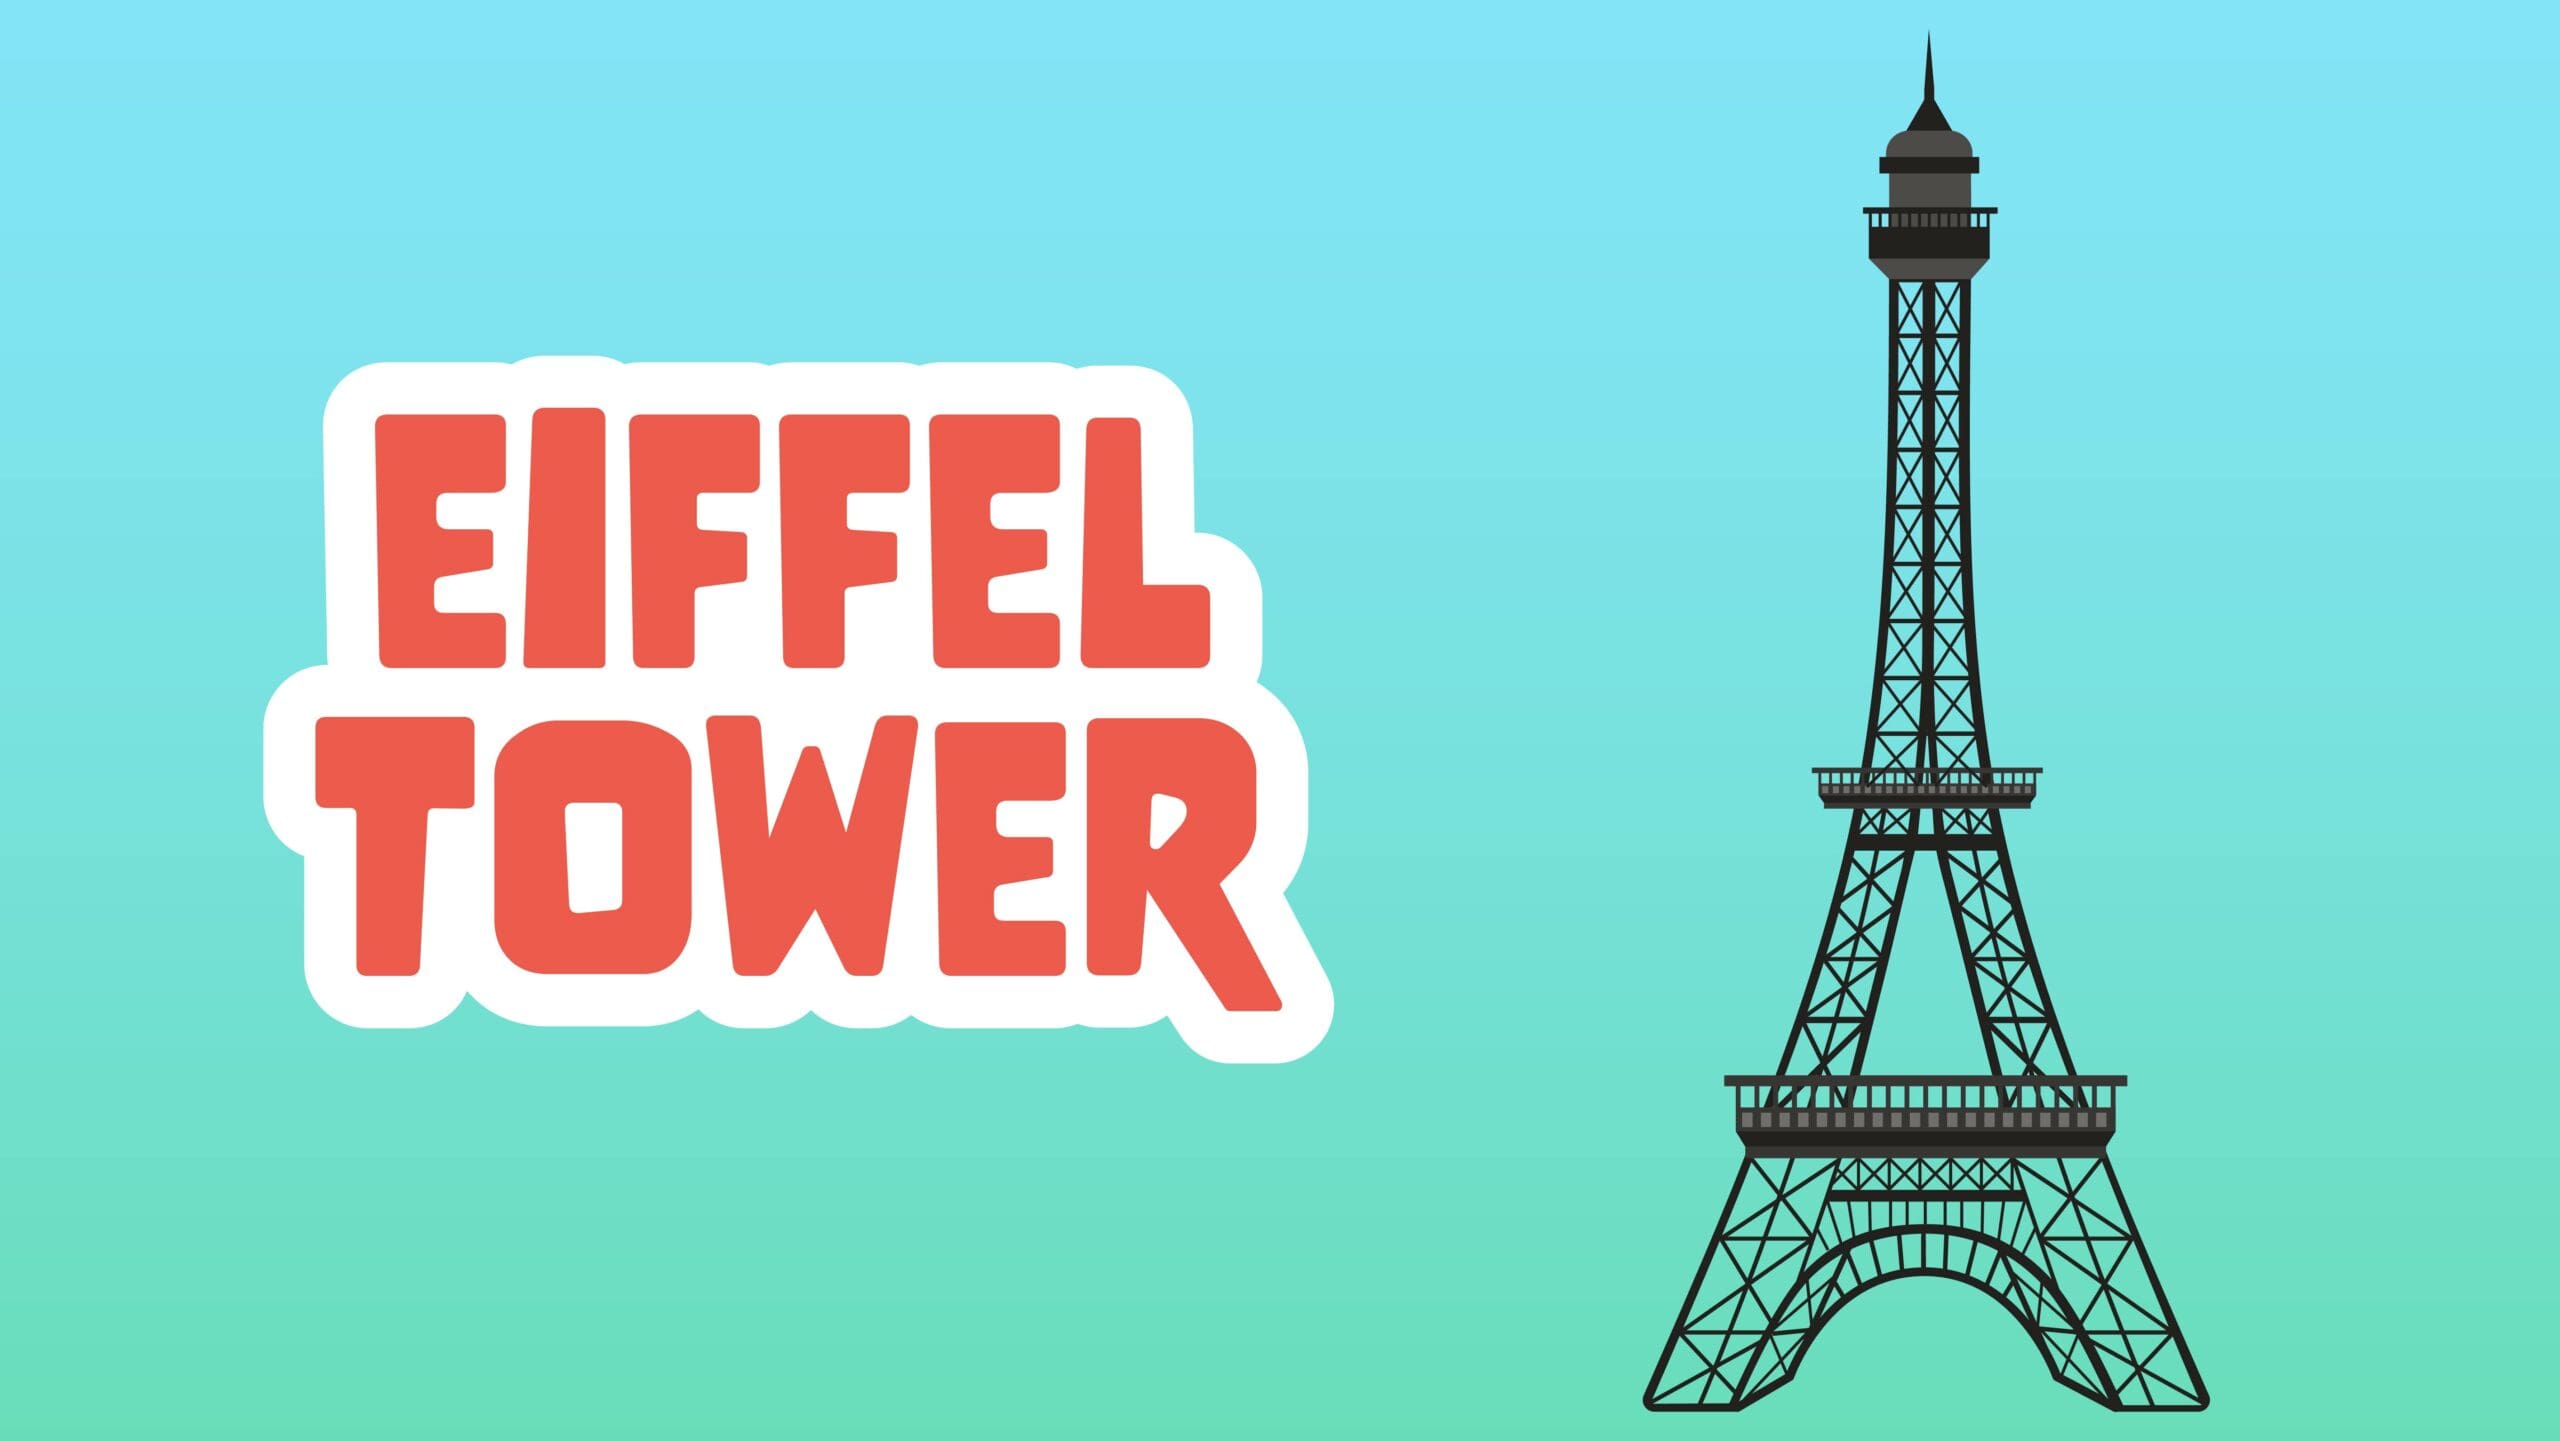 Eiffel Tower Facts for kids – 5 Awesome Facts about the Eiffel Tower